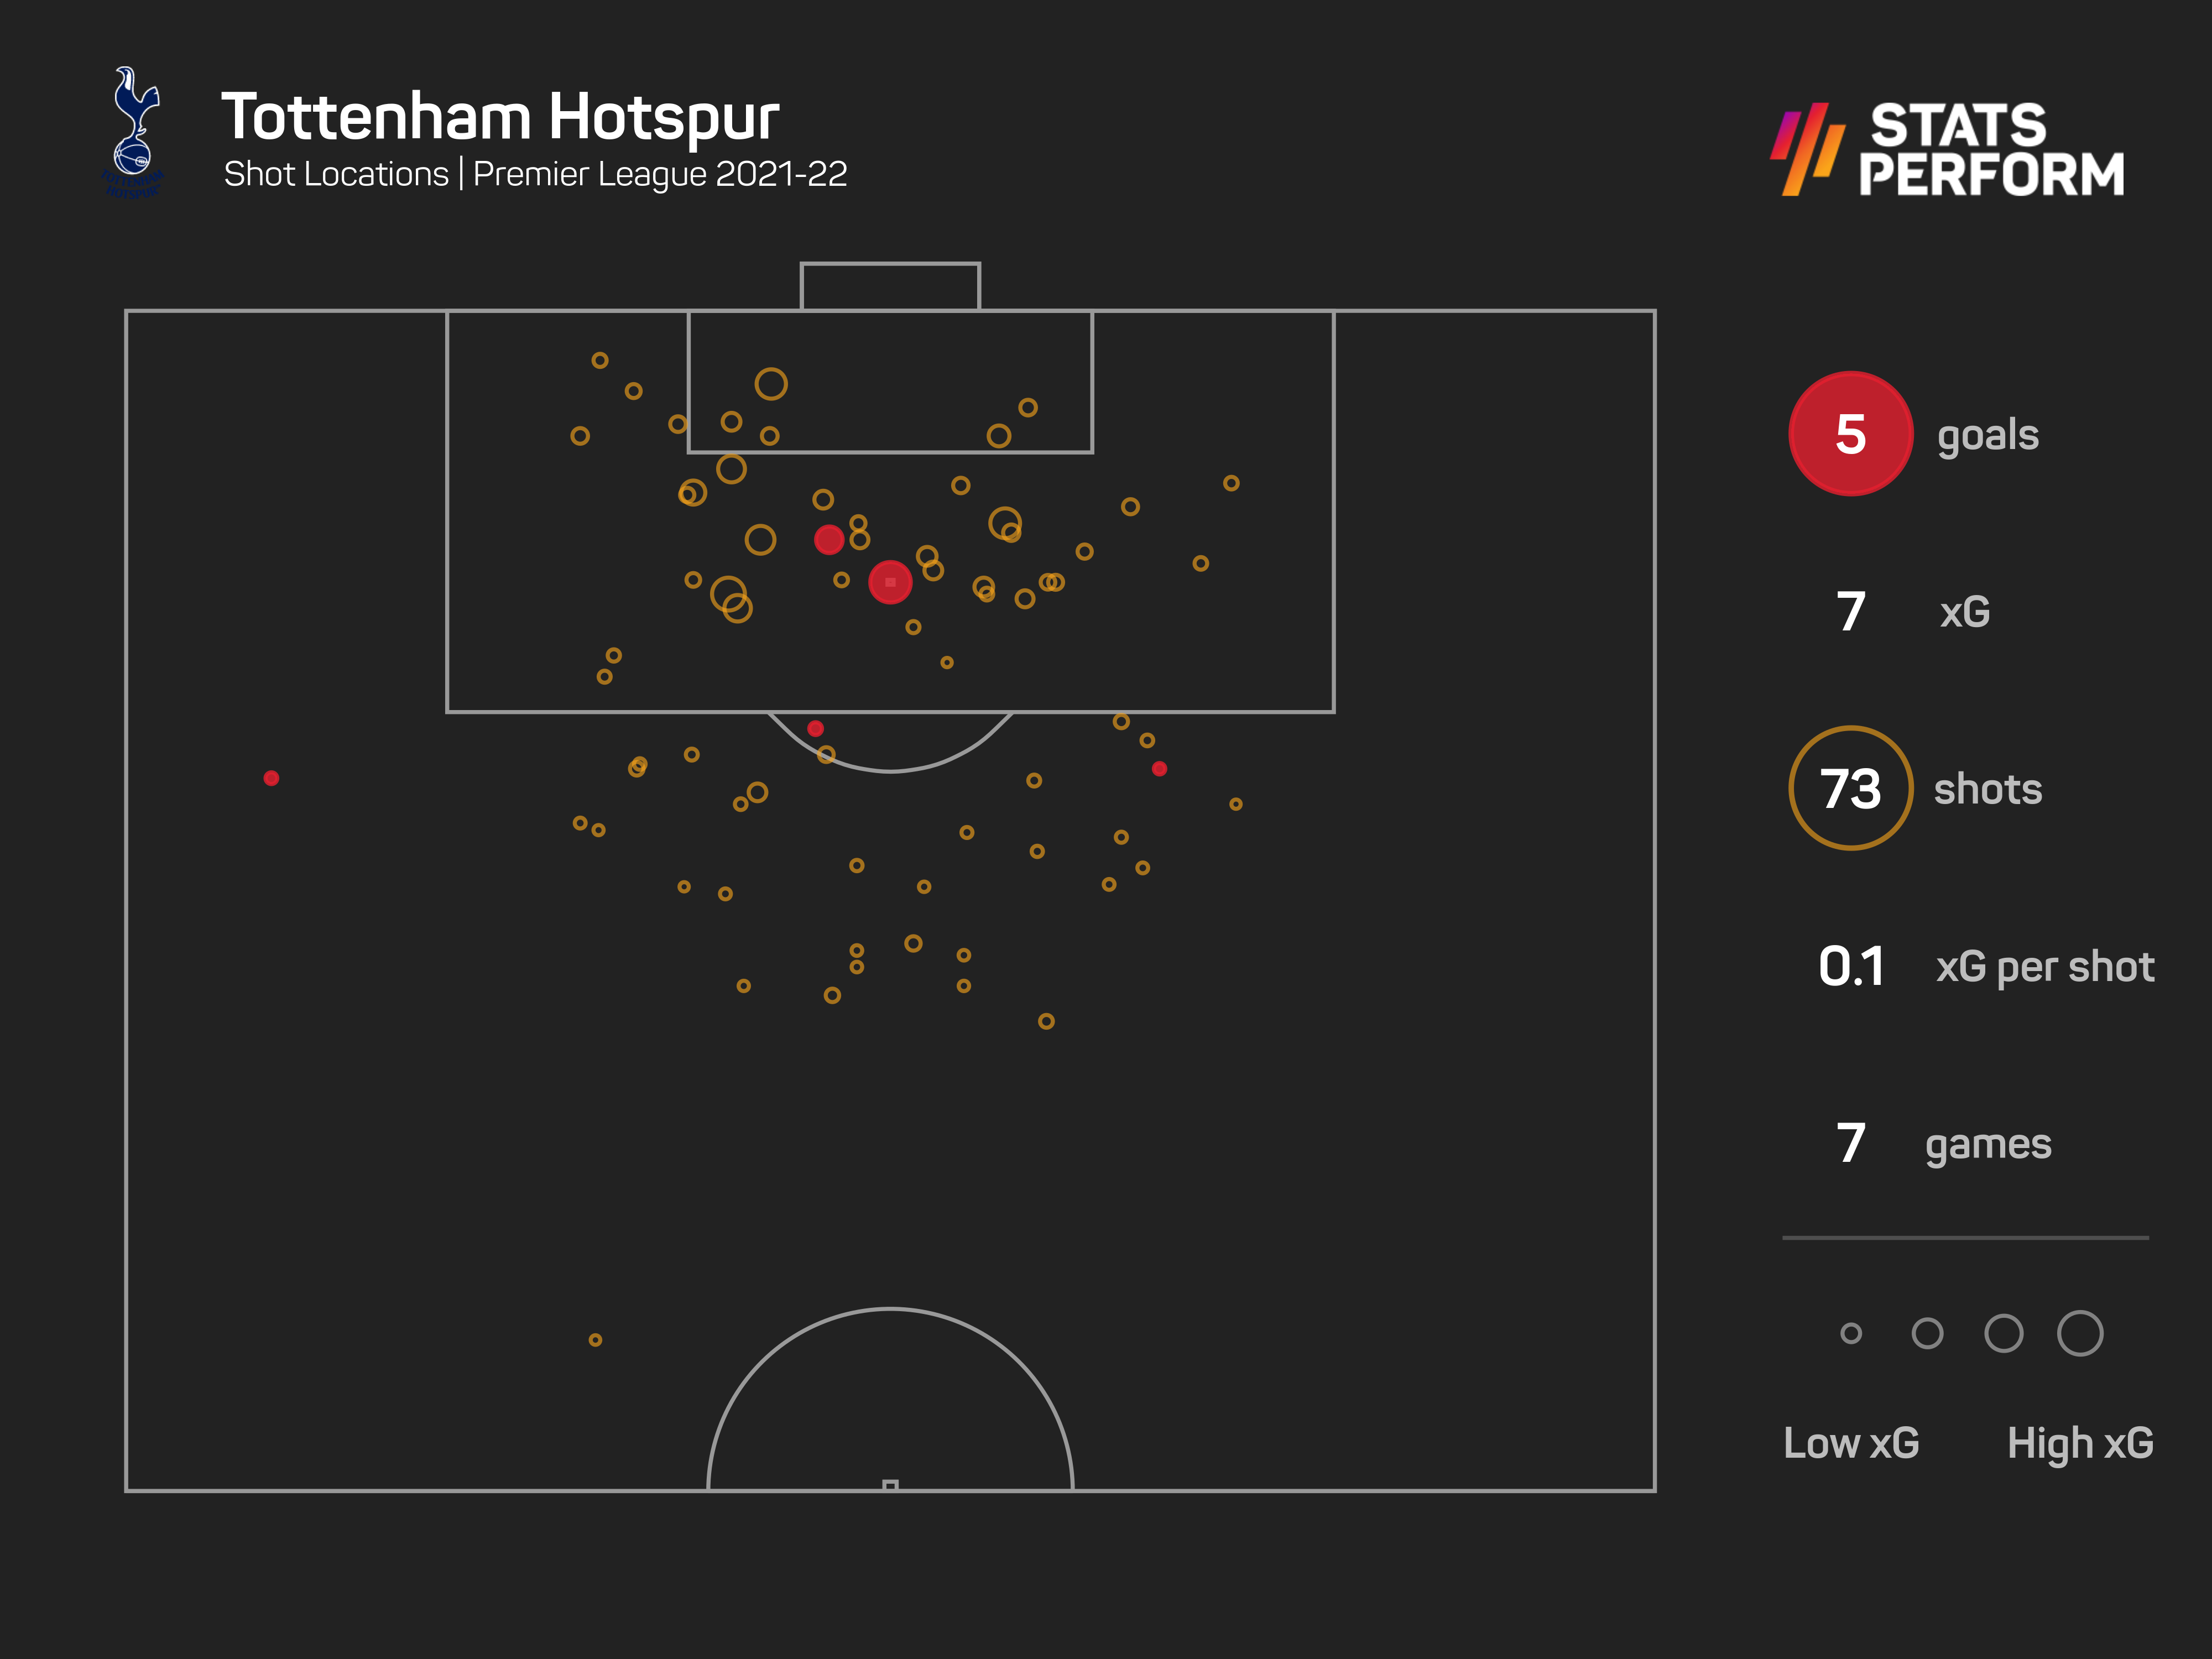 Prior to the weekend, Spurs had the second lowest xG total in the competition this term (5.4).